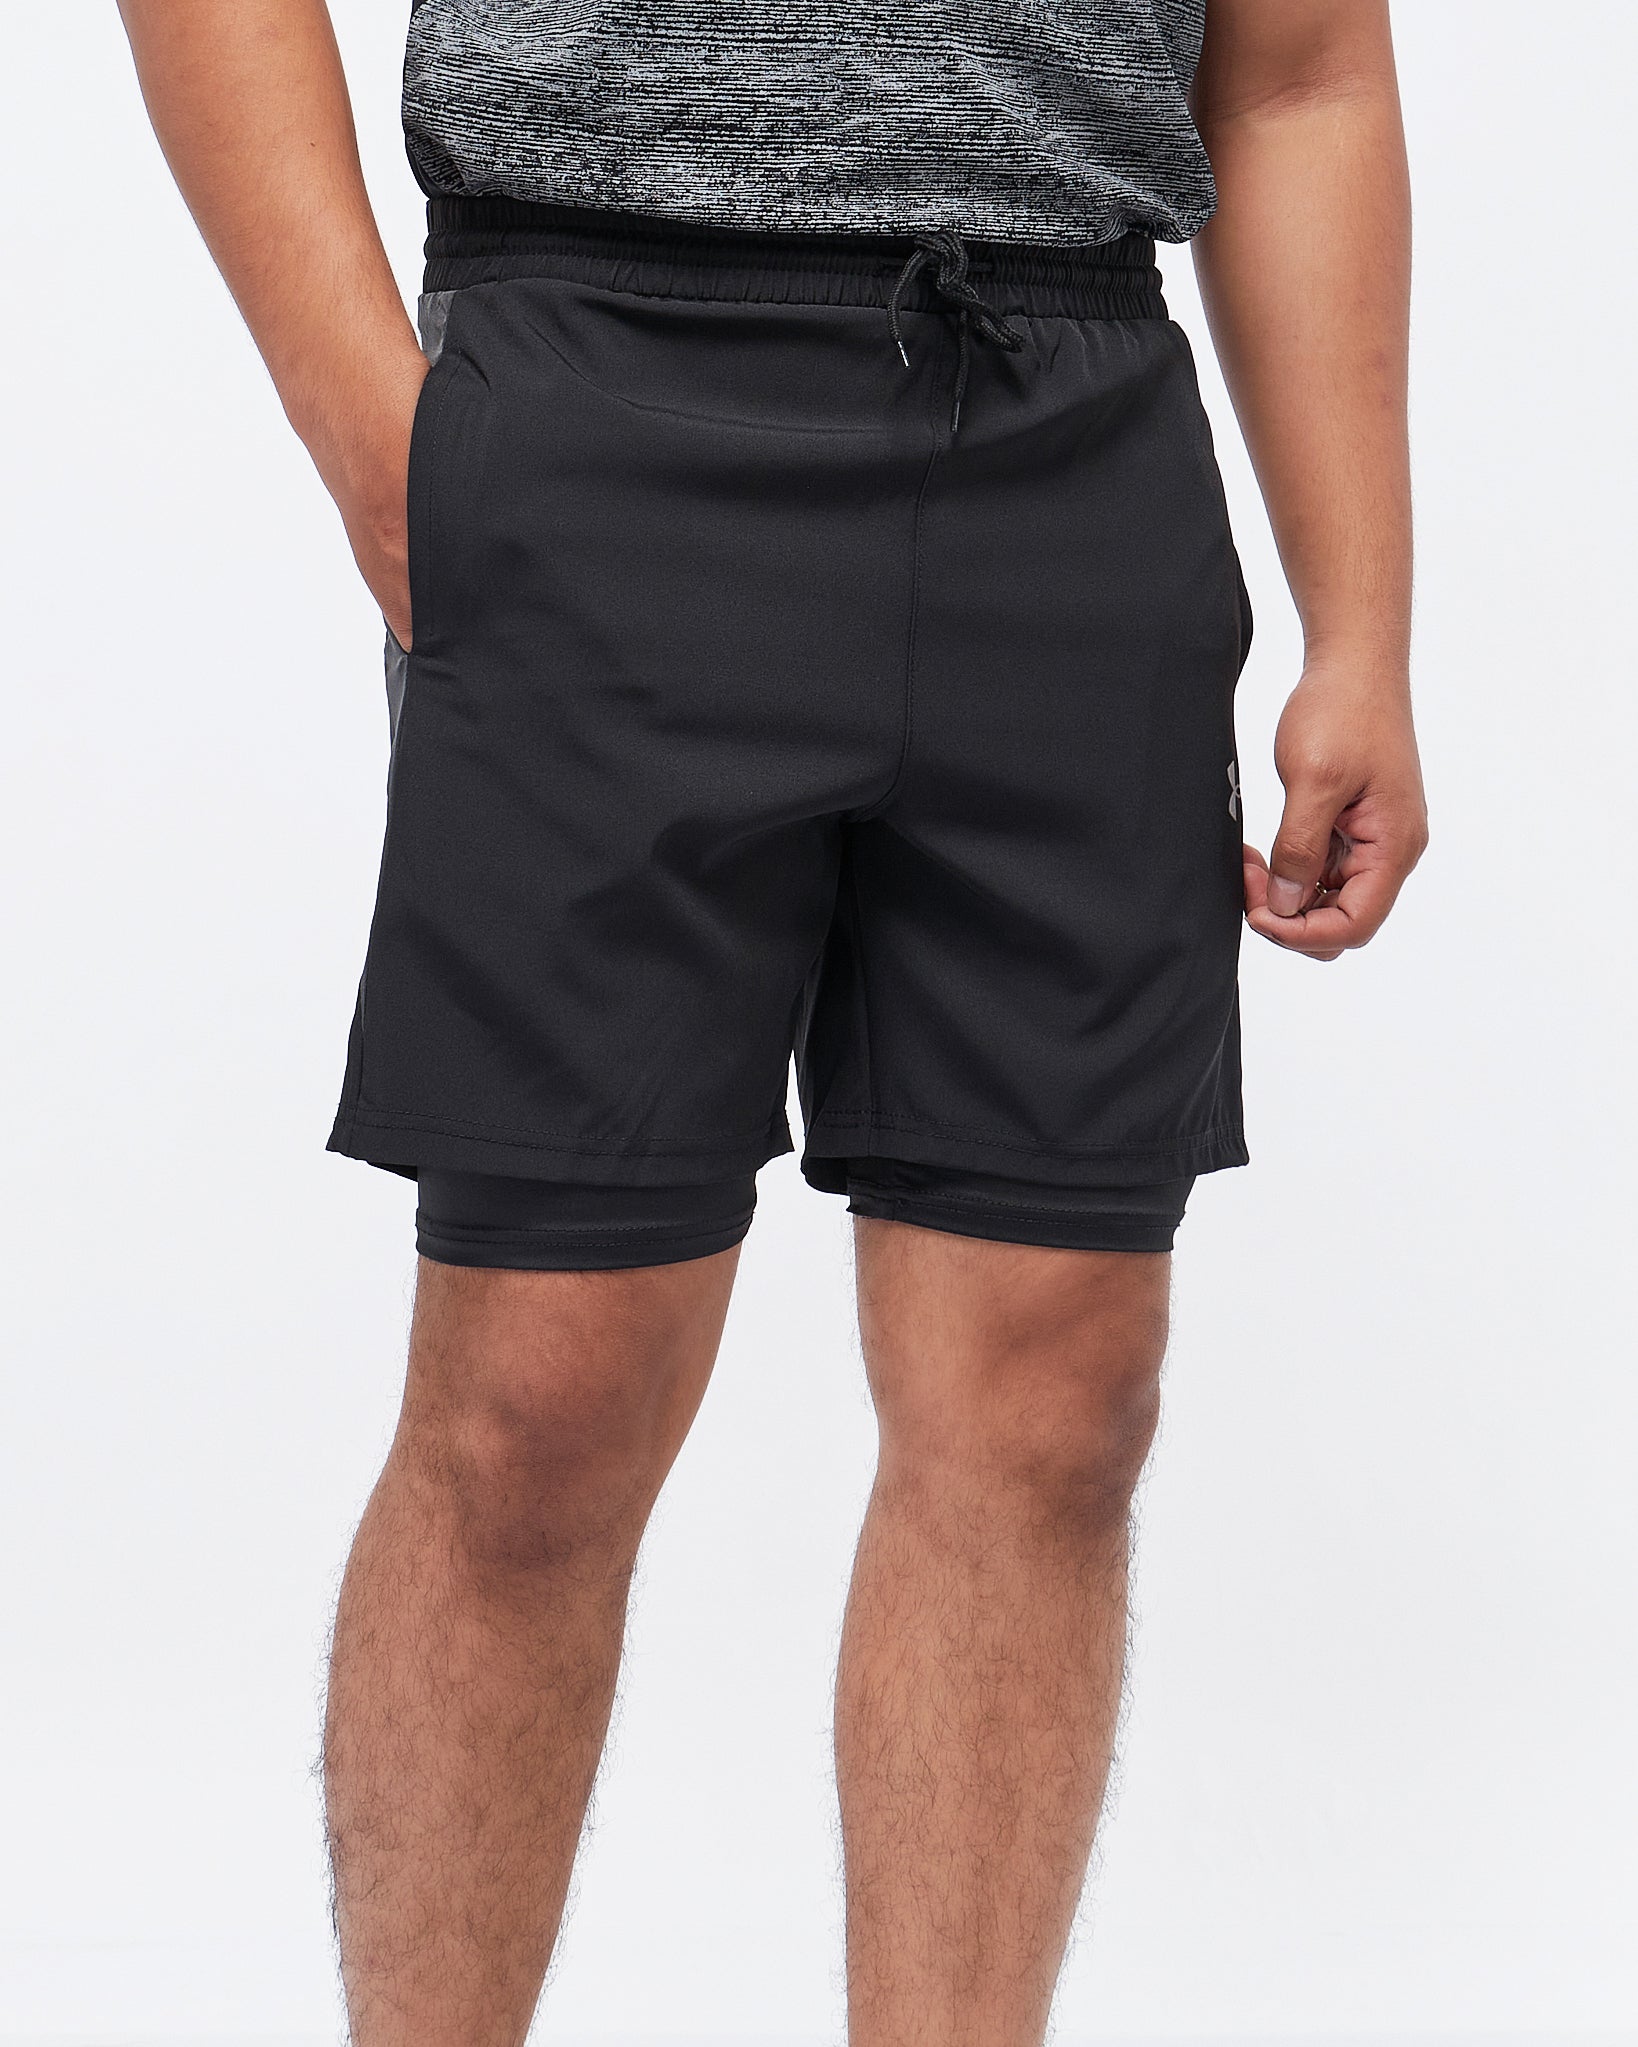 MOI OUTFIT-Side Color Block 2 in 1 Men Sport Shorts 13.90